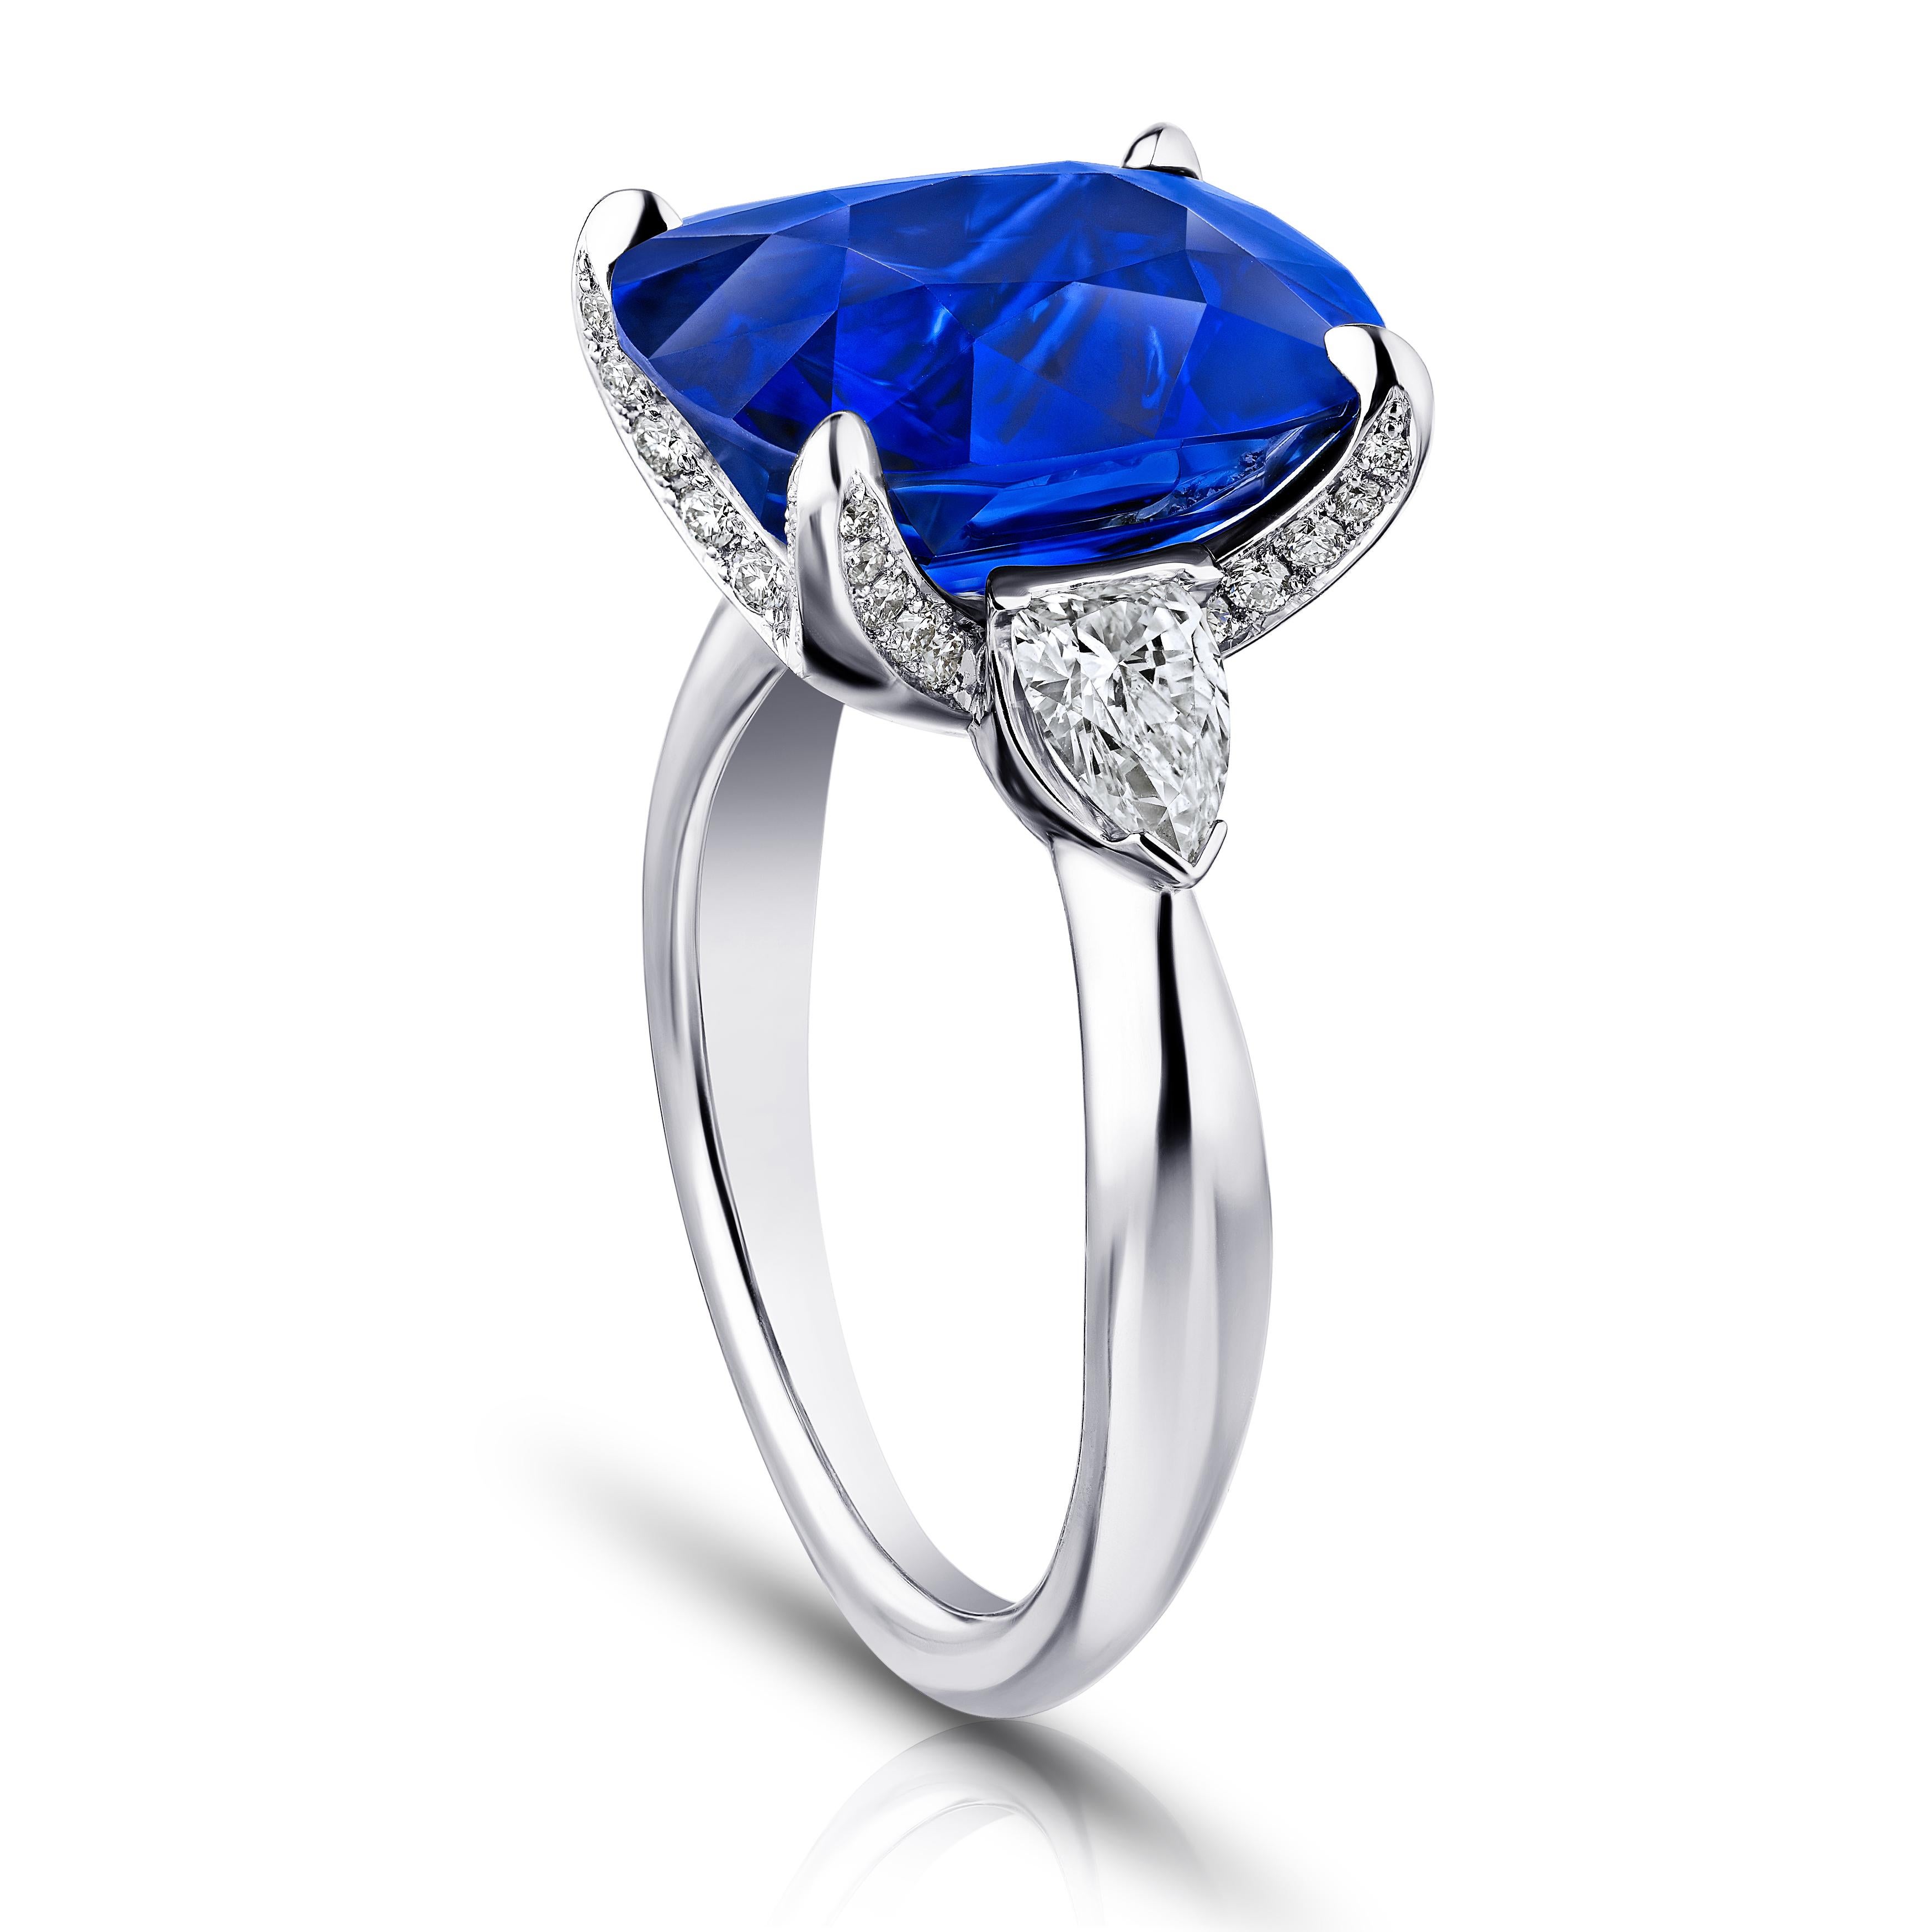 9.81 carat cushion blue sapphire with arrow shaped diamonds .67 carats set in a platinum ring. Size 7. Free resizing to your finger size. This ring is breathtaking. The center stone has a huge look. Its totally clean and has excellent color